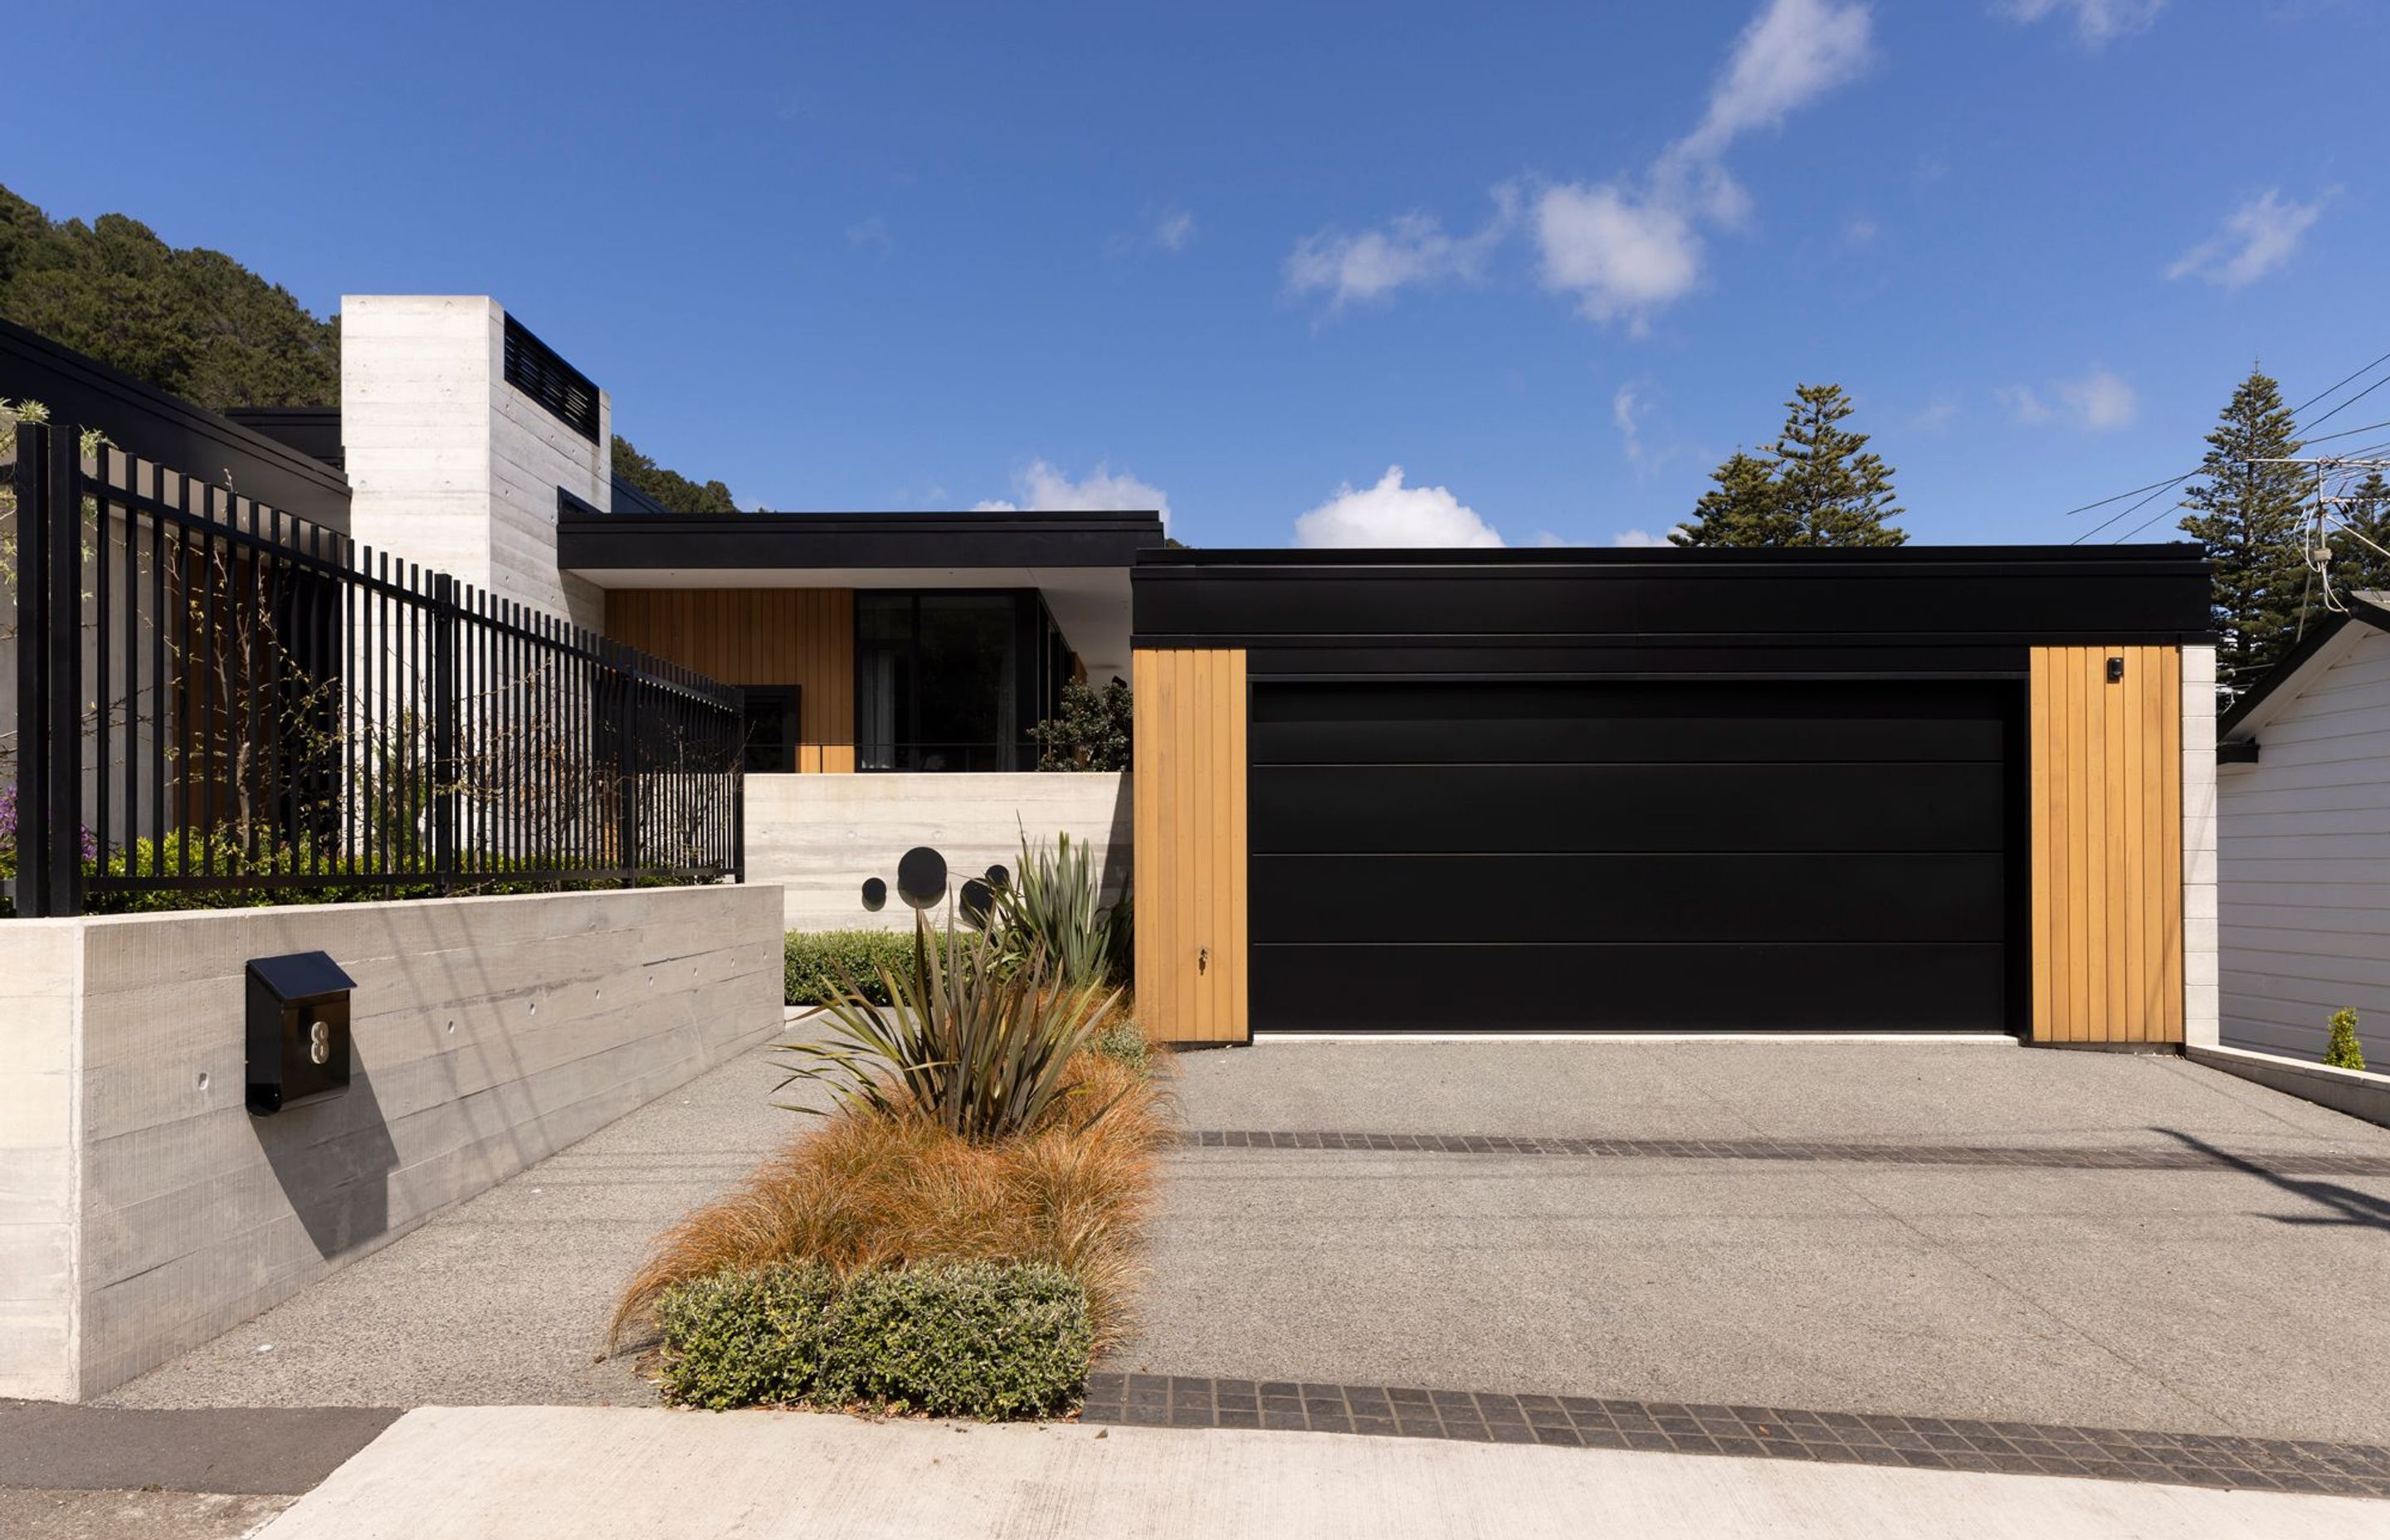 The three-bedroom home in Wellington’s Eastbourne is predominantly formed-concrete and cedar, says Richard Beatson of Studio Pacific Architecture. “The material palette is deliberately limited to maintain clarity in the design. It’s a contemporary interpretation of a mid-century style in scale, form and materiality.”